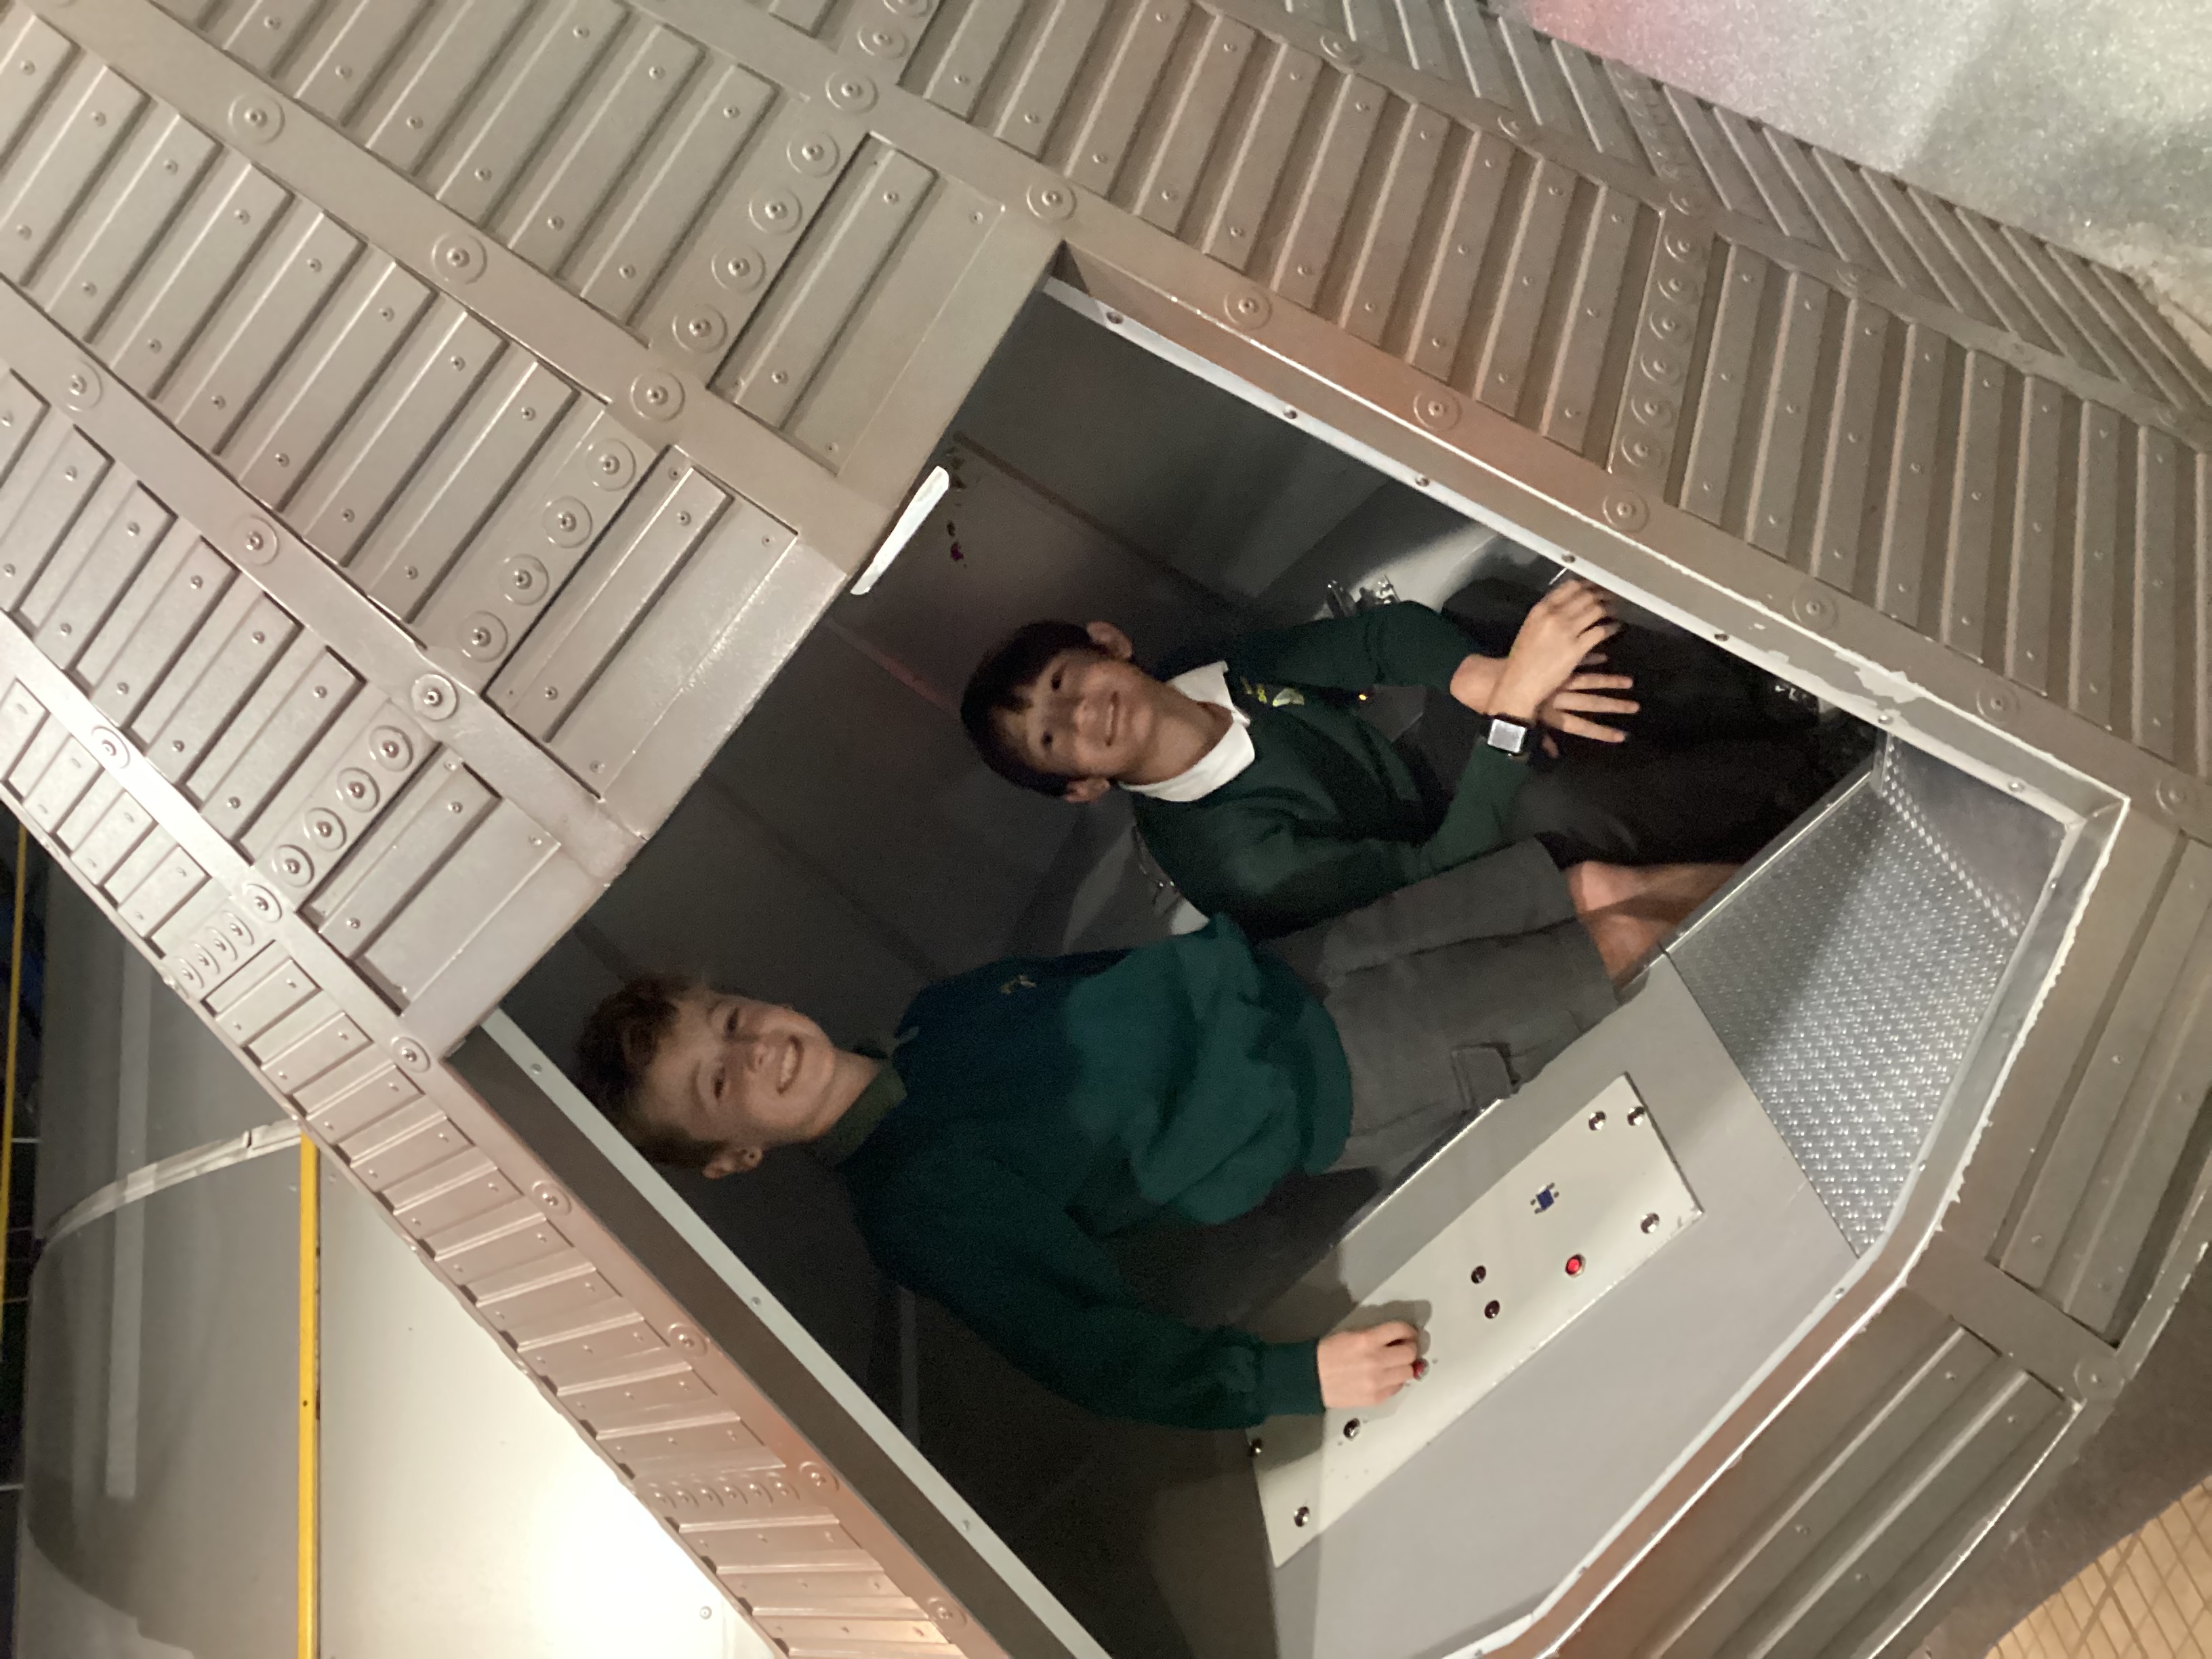 Boys sitting in a space ship